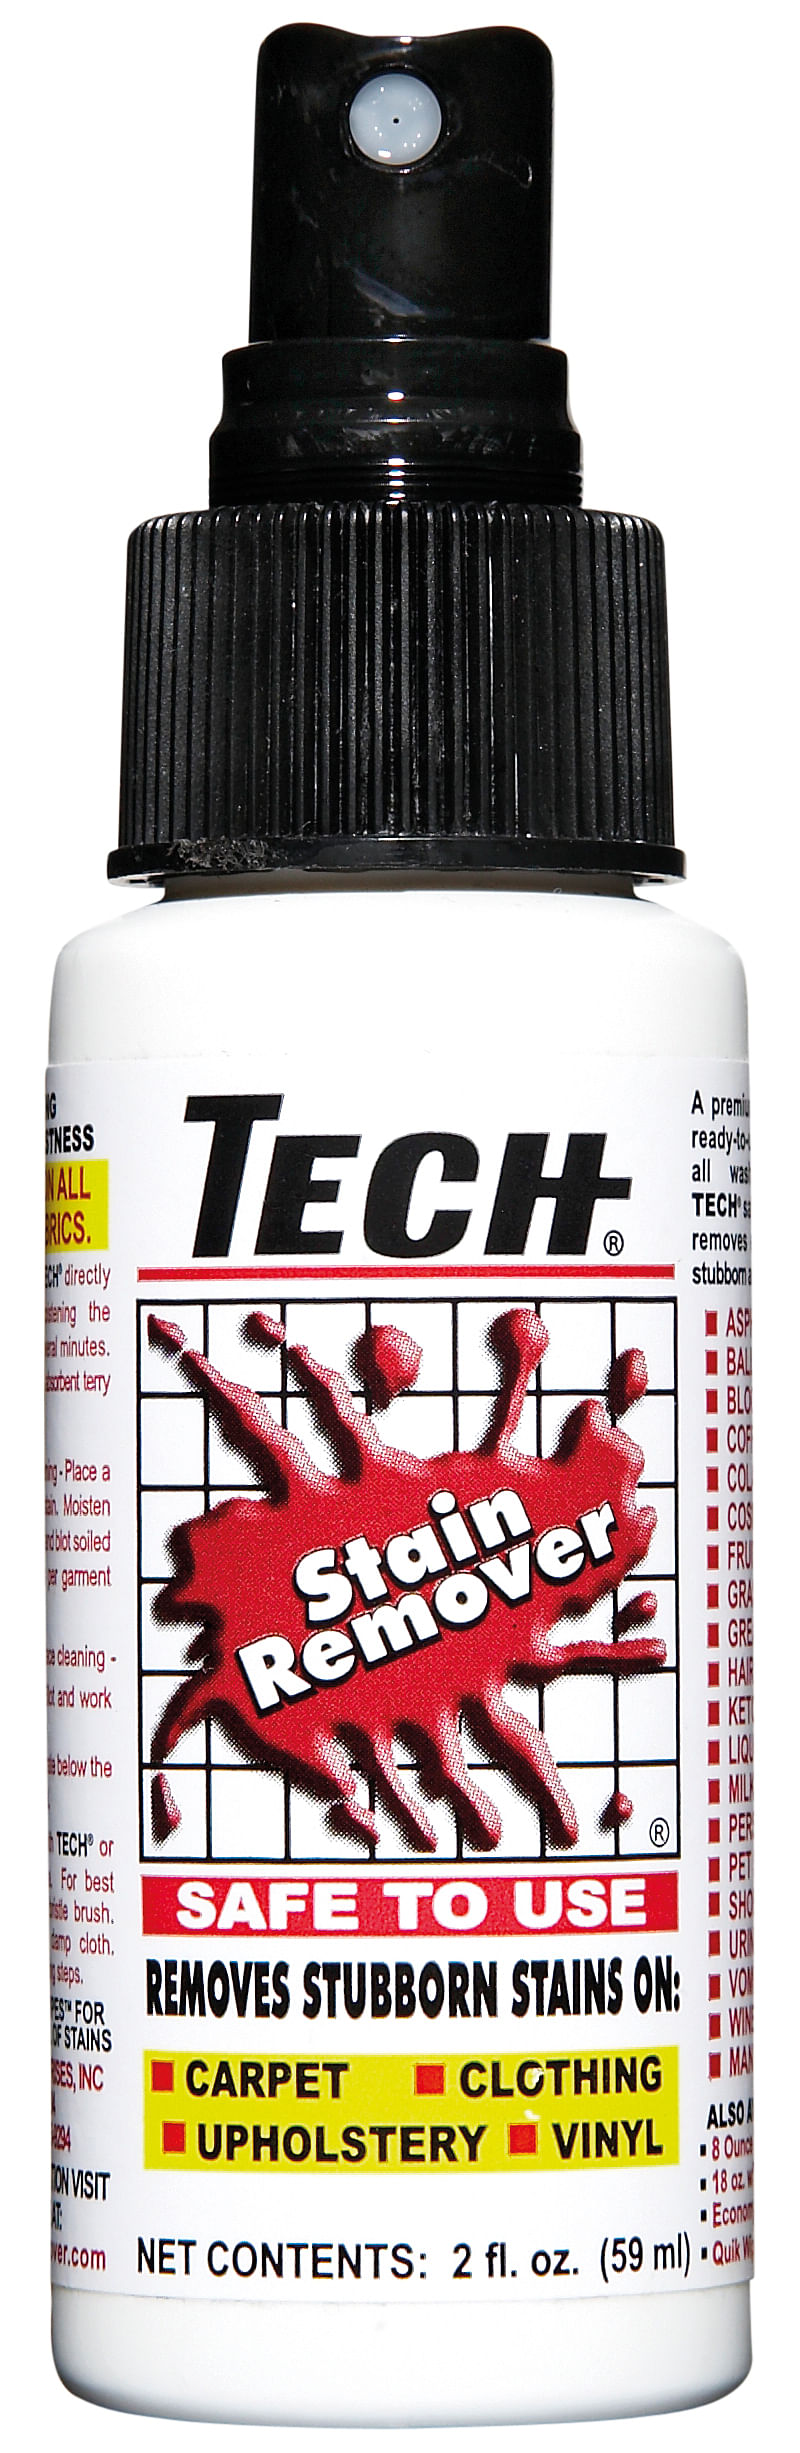 Product review: Tech instant stain remover